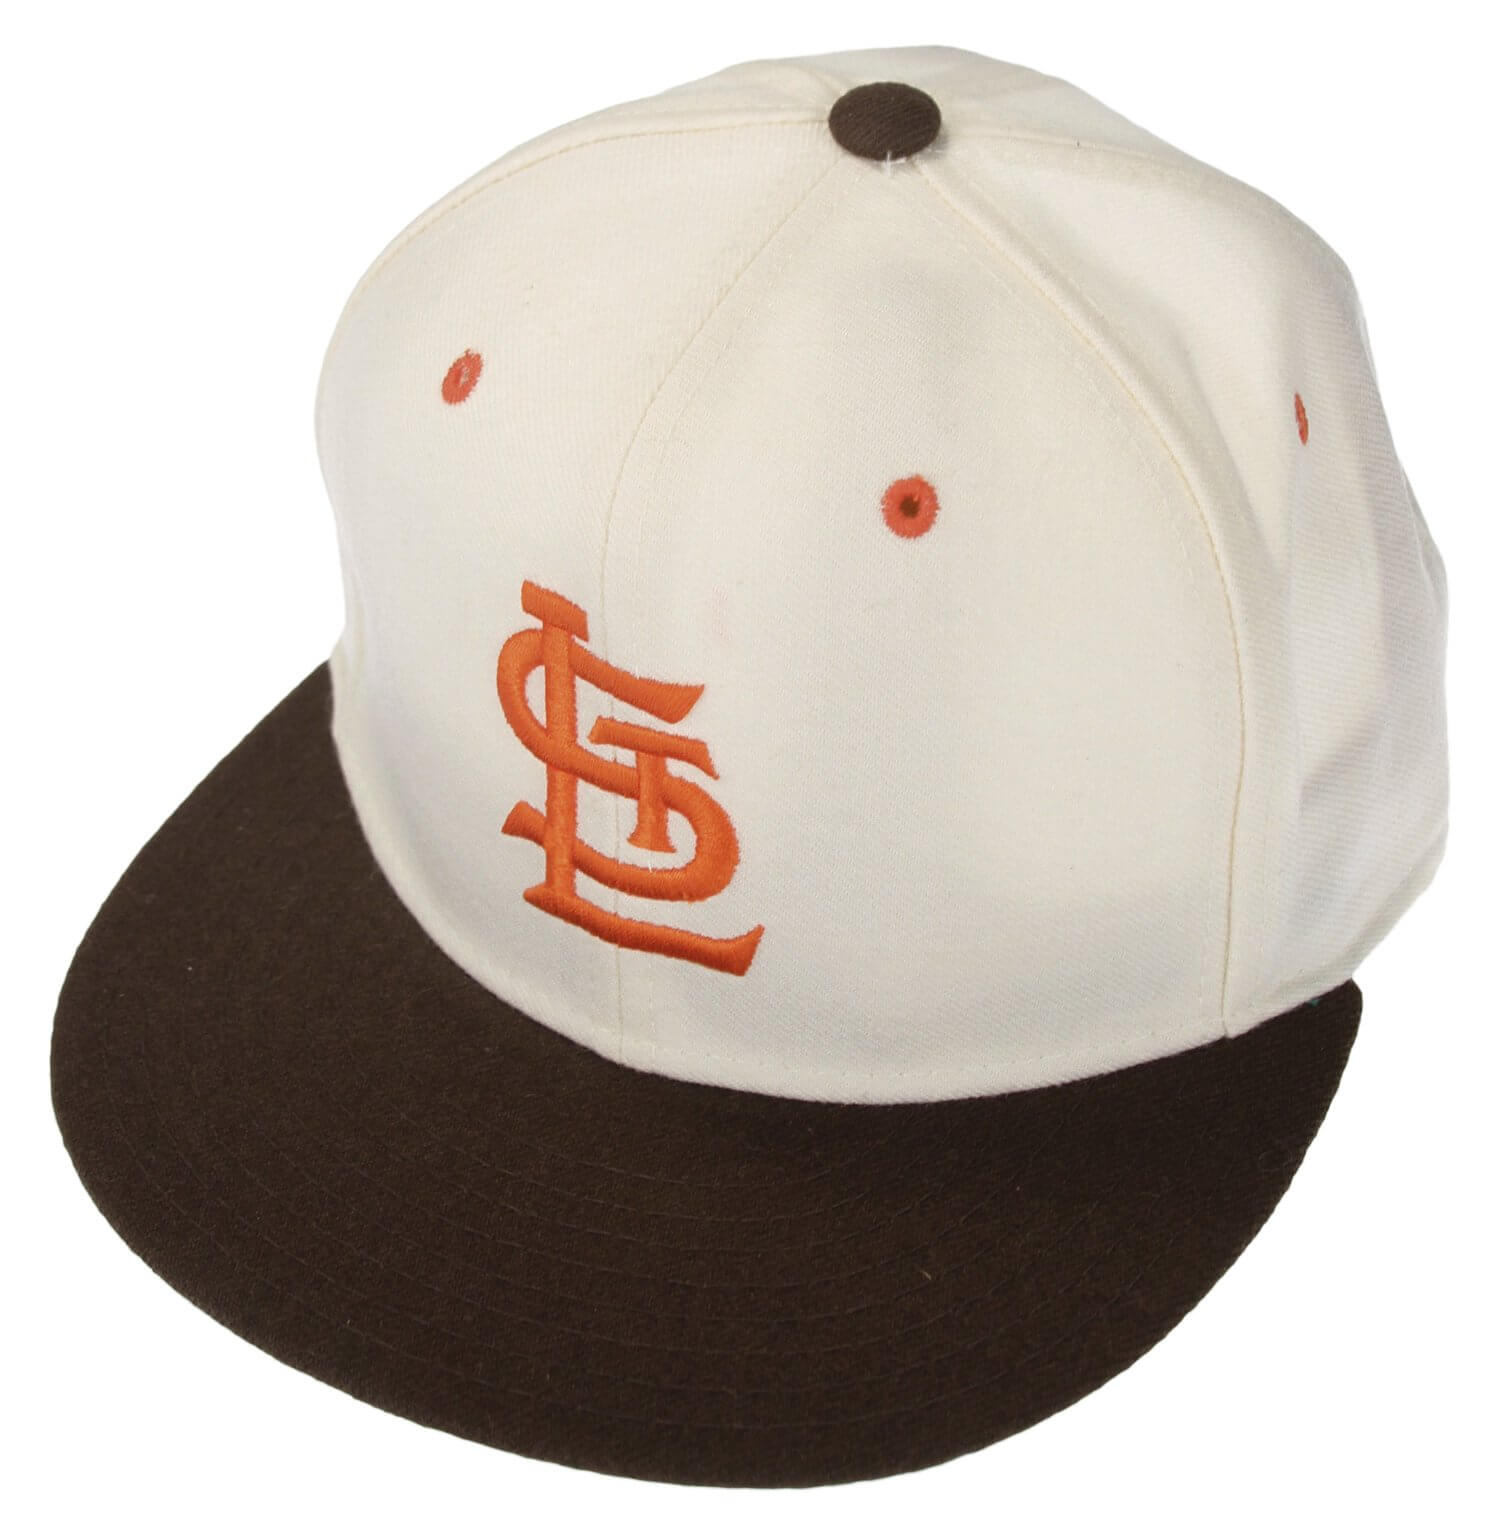 Men's New Era White/Brown St. Louis Browns Cooperstown Collection on Deck 59FIFTY Fitted Hat